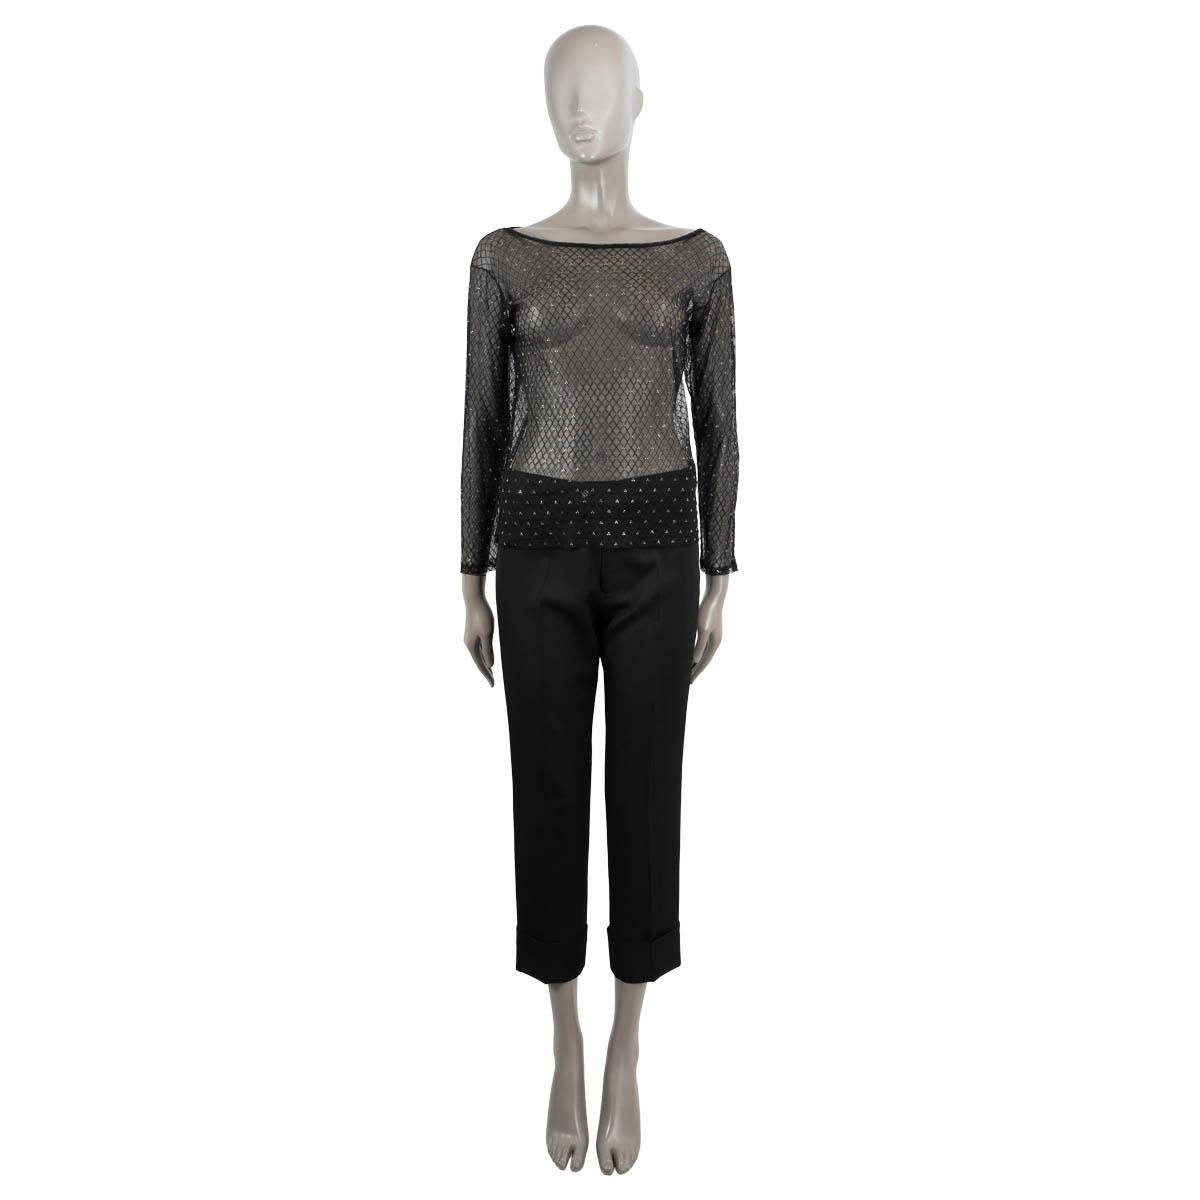 100% authentic Saint Laurent sheer top in black mesh (please note content tag has been removed). Features bead embellishment. Unlined. Has been worn and is in excellent condition.

Measurements
Tag Size	Missing Size
Size	S
Shoulder Width	45cm